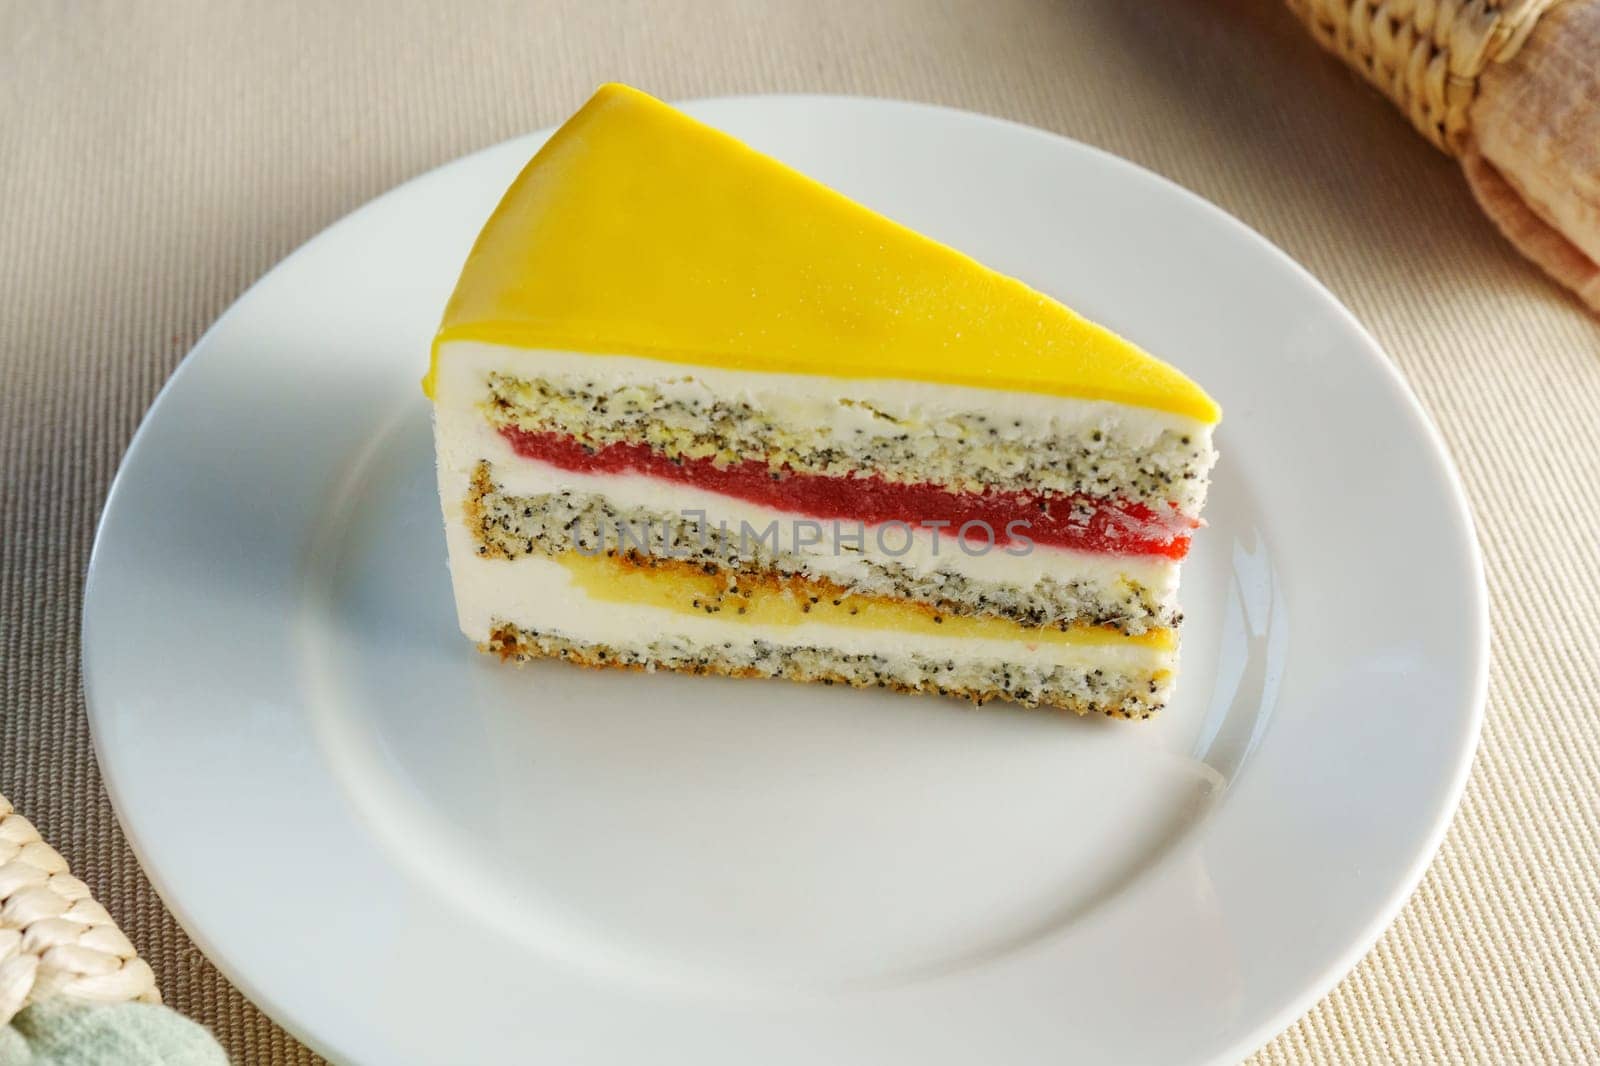 Indulge in the delectable sight of a scrumptious slice of cake gracefully placed on a pristine white plate.